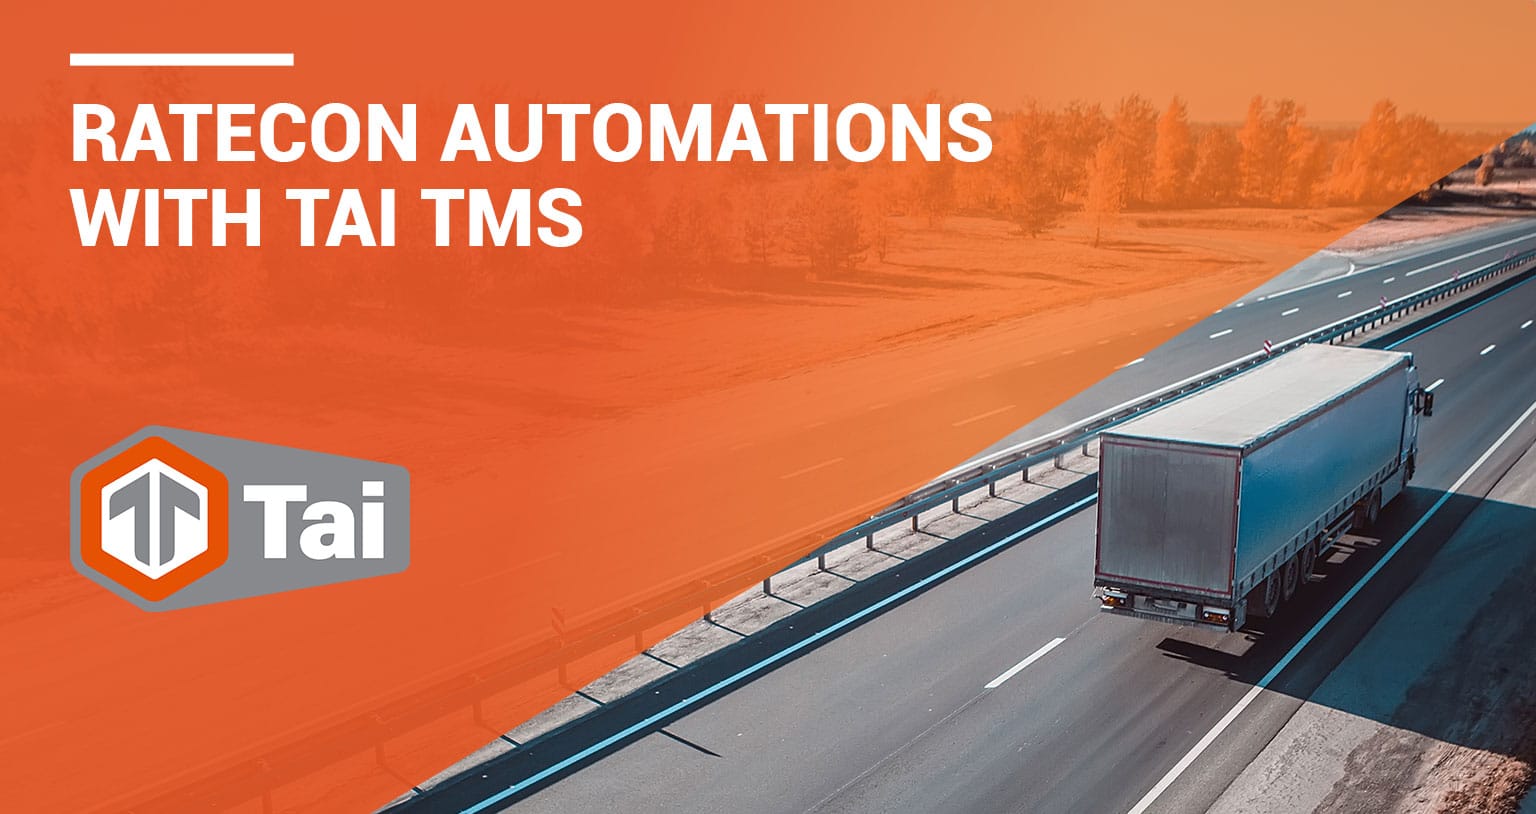 Freight Brokers using a TMS for ratecon automations